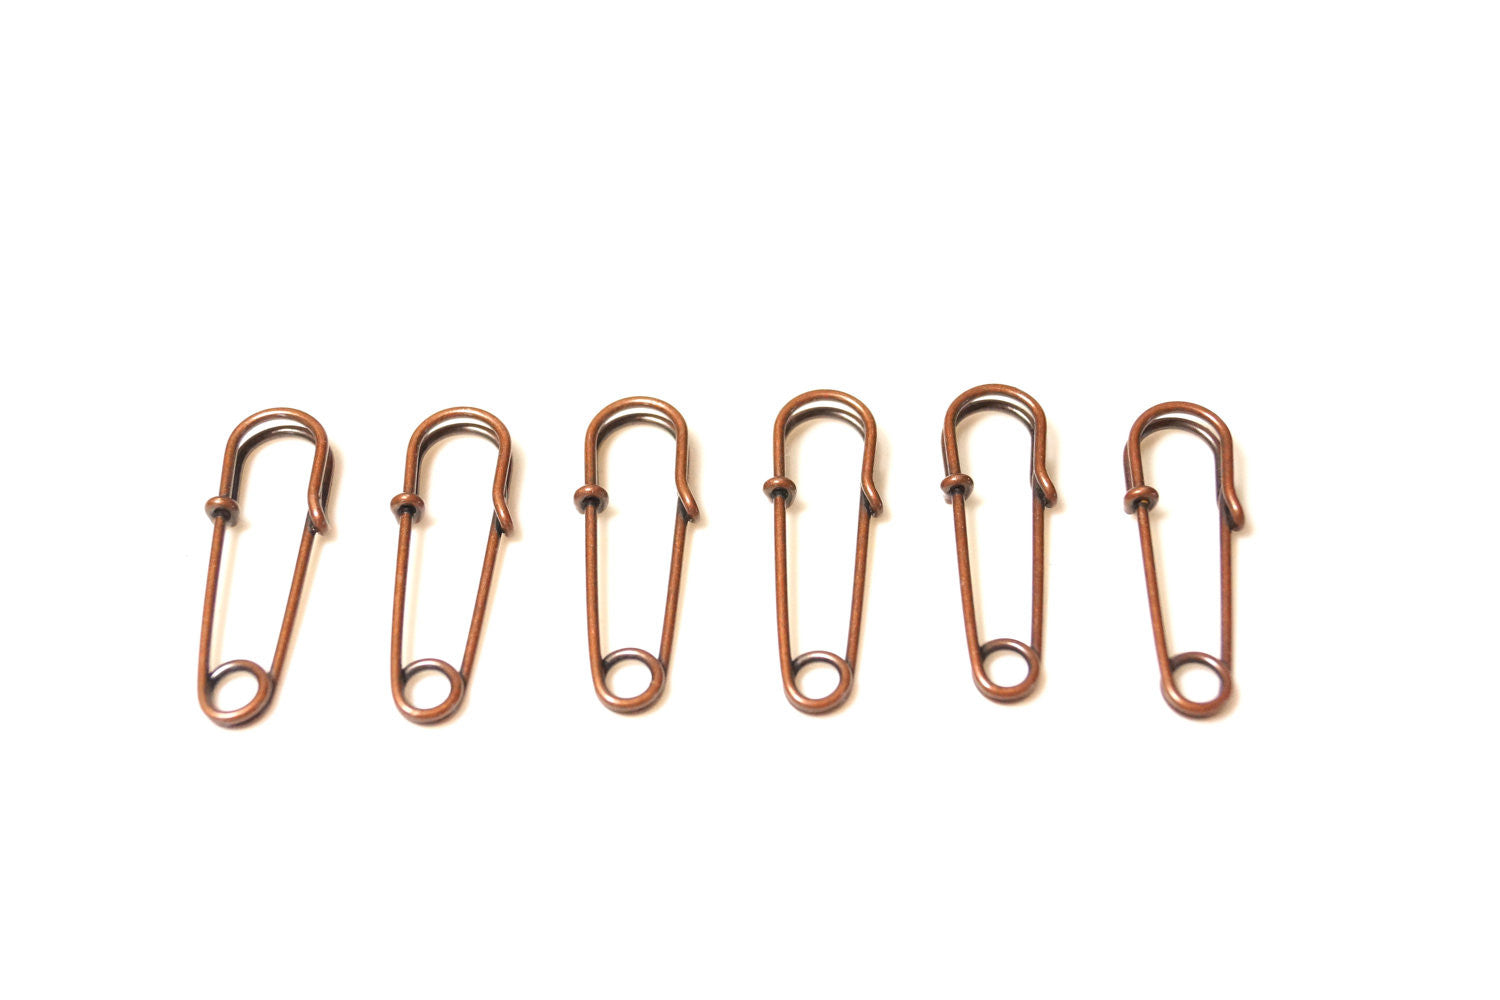 Metal Laundry Pin Style Pins in Antique Copper Finish (Set of 6 ...